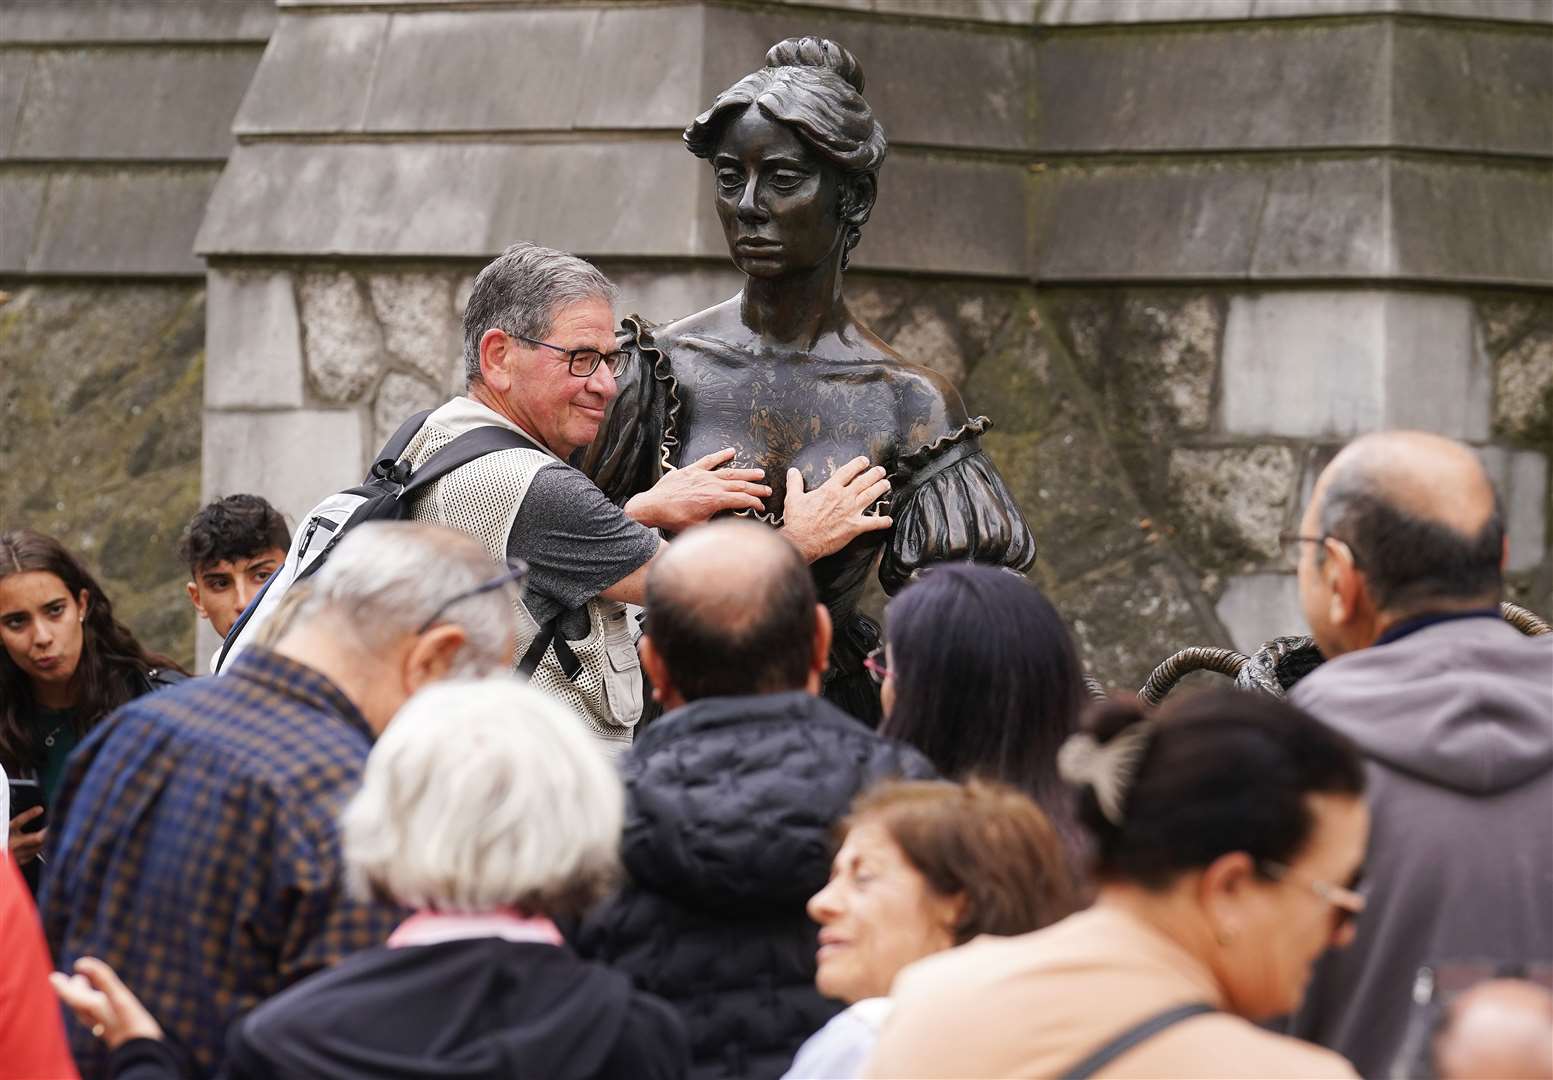 The statue of the semi-historical, semi-legendary figure of Molly Malone in Dublin city centre was vandalised with black paint in August. It did not deter people from posing for photographs at the popular tourist destination (Brian Lawless/PA)